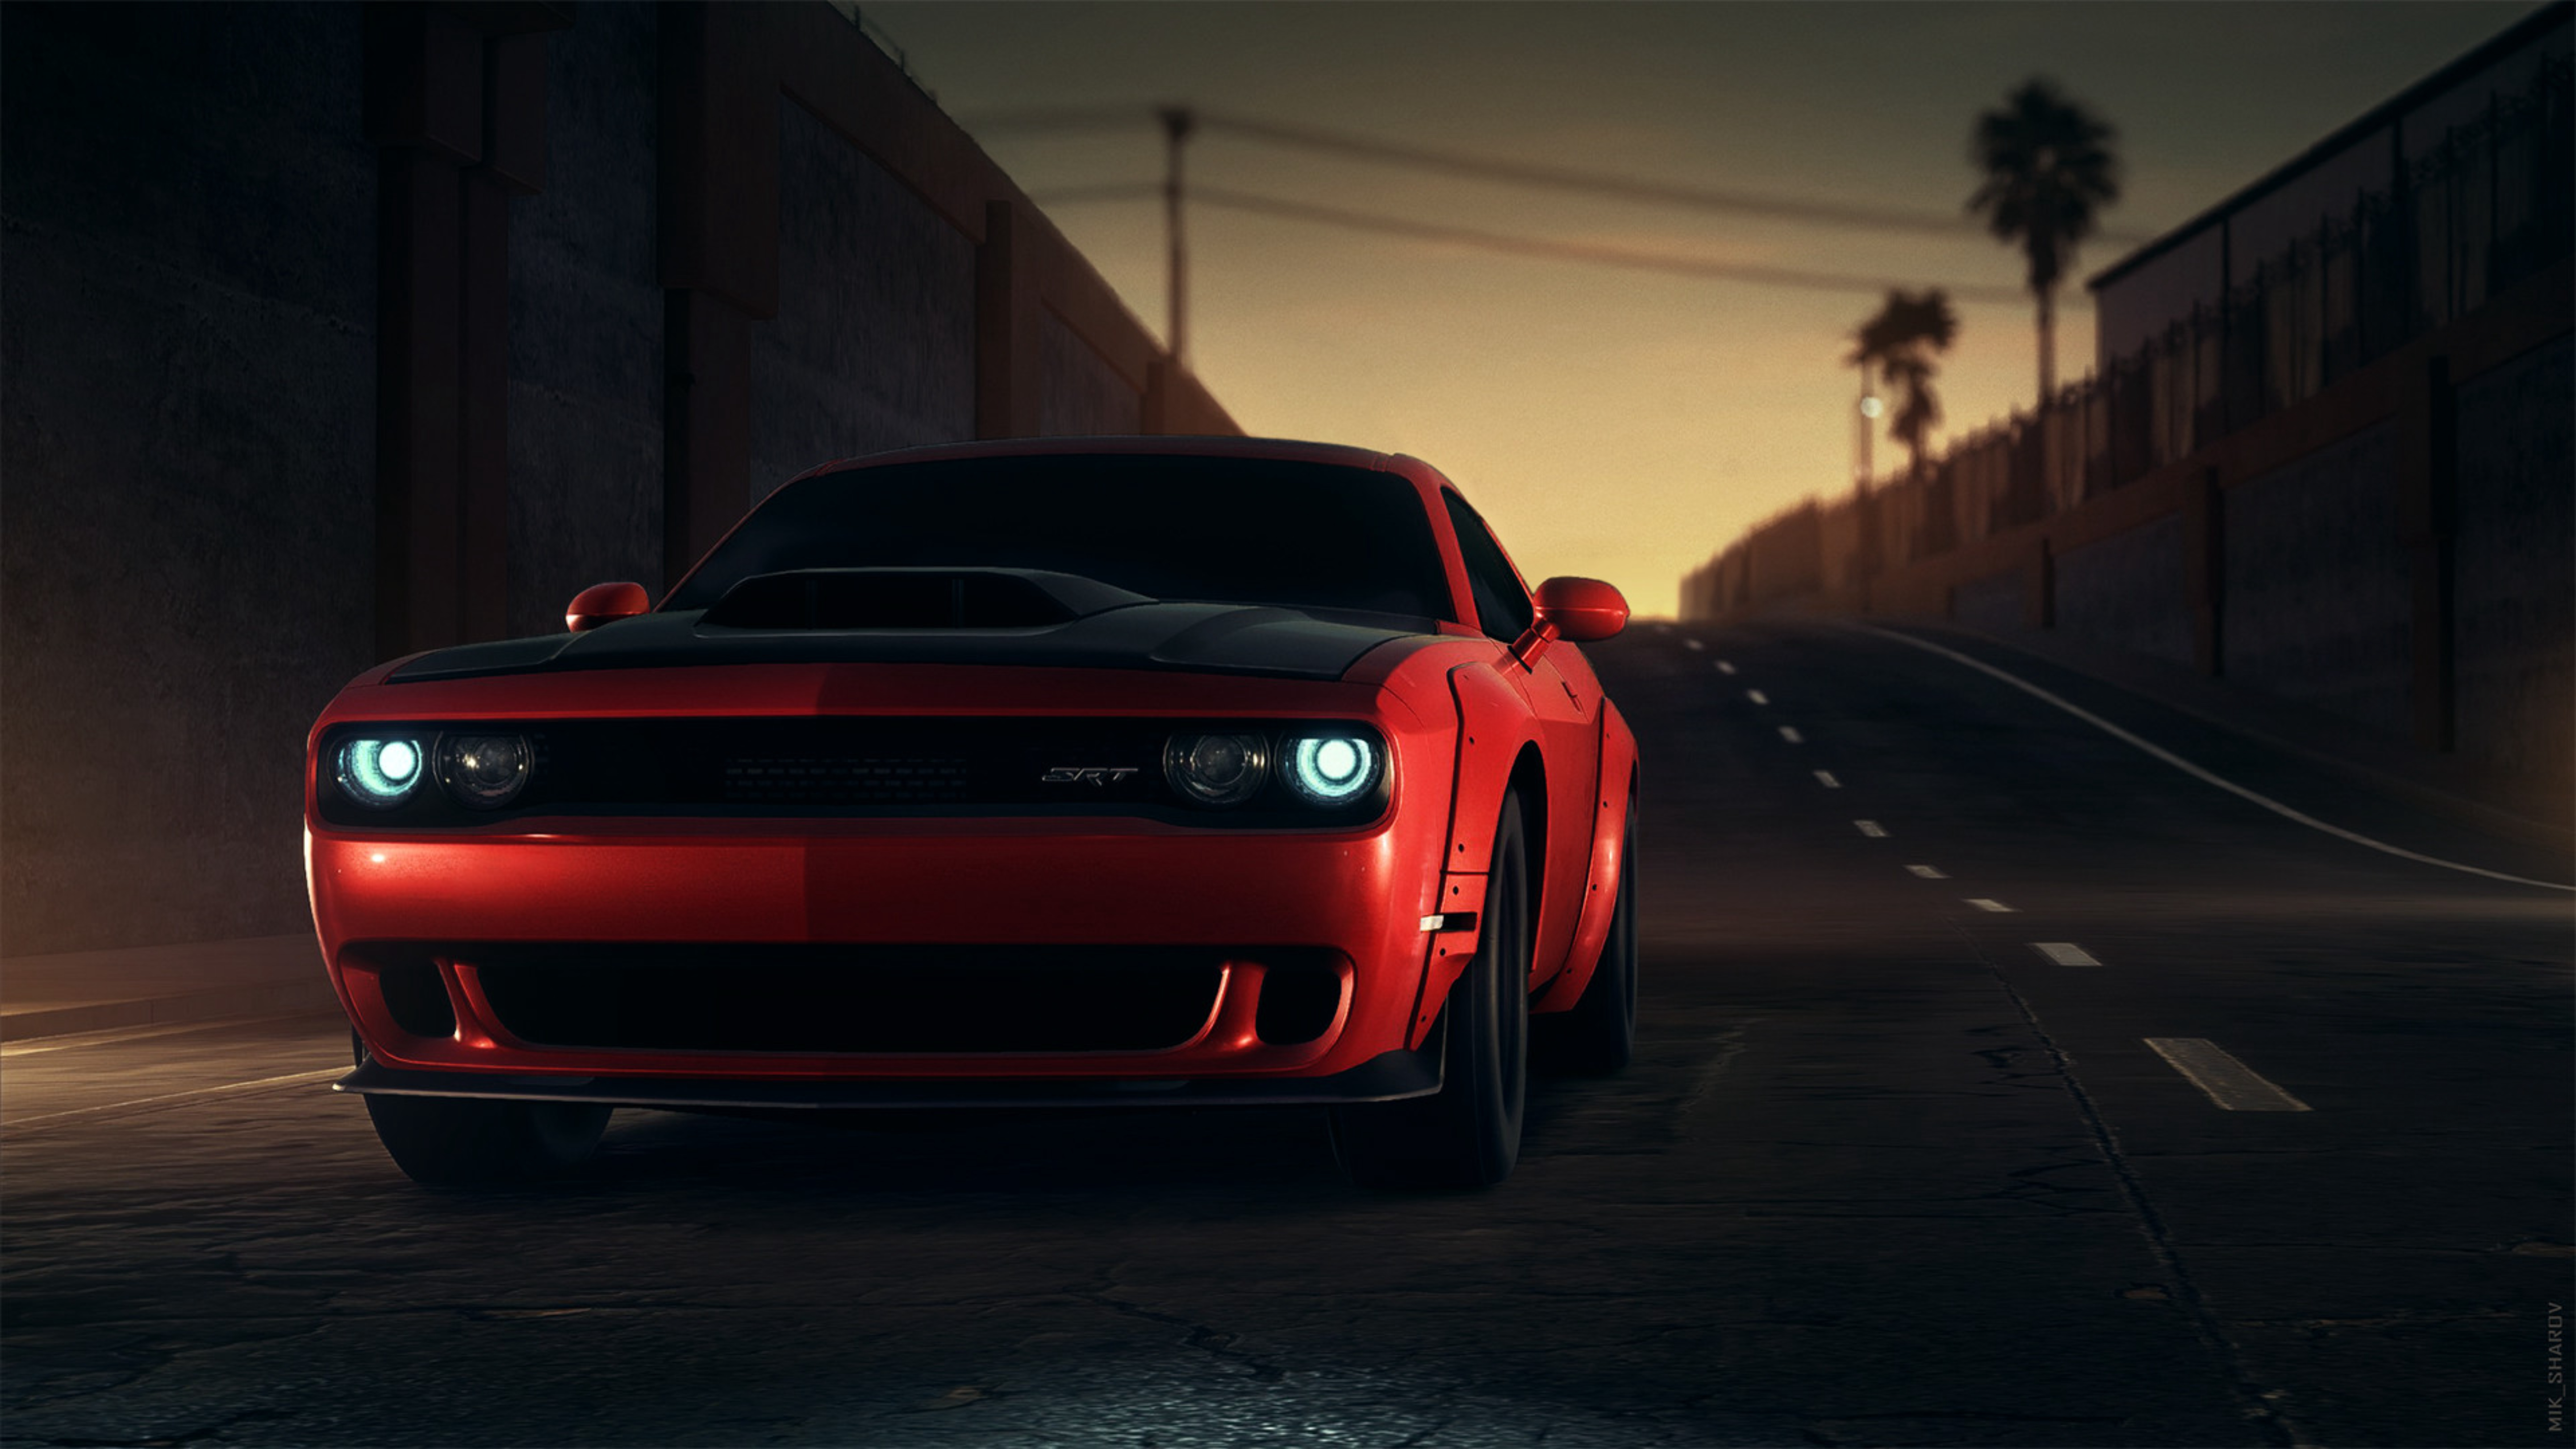 cars, sports car, front view, headlights, dodge srt, dodge, sports, red, lights cell phone wallpapers